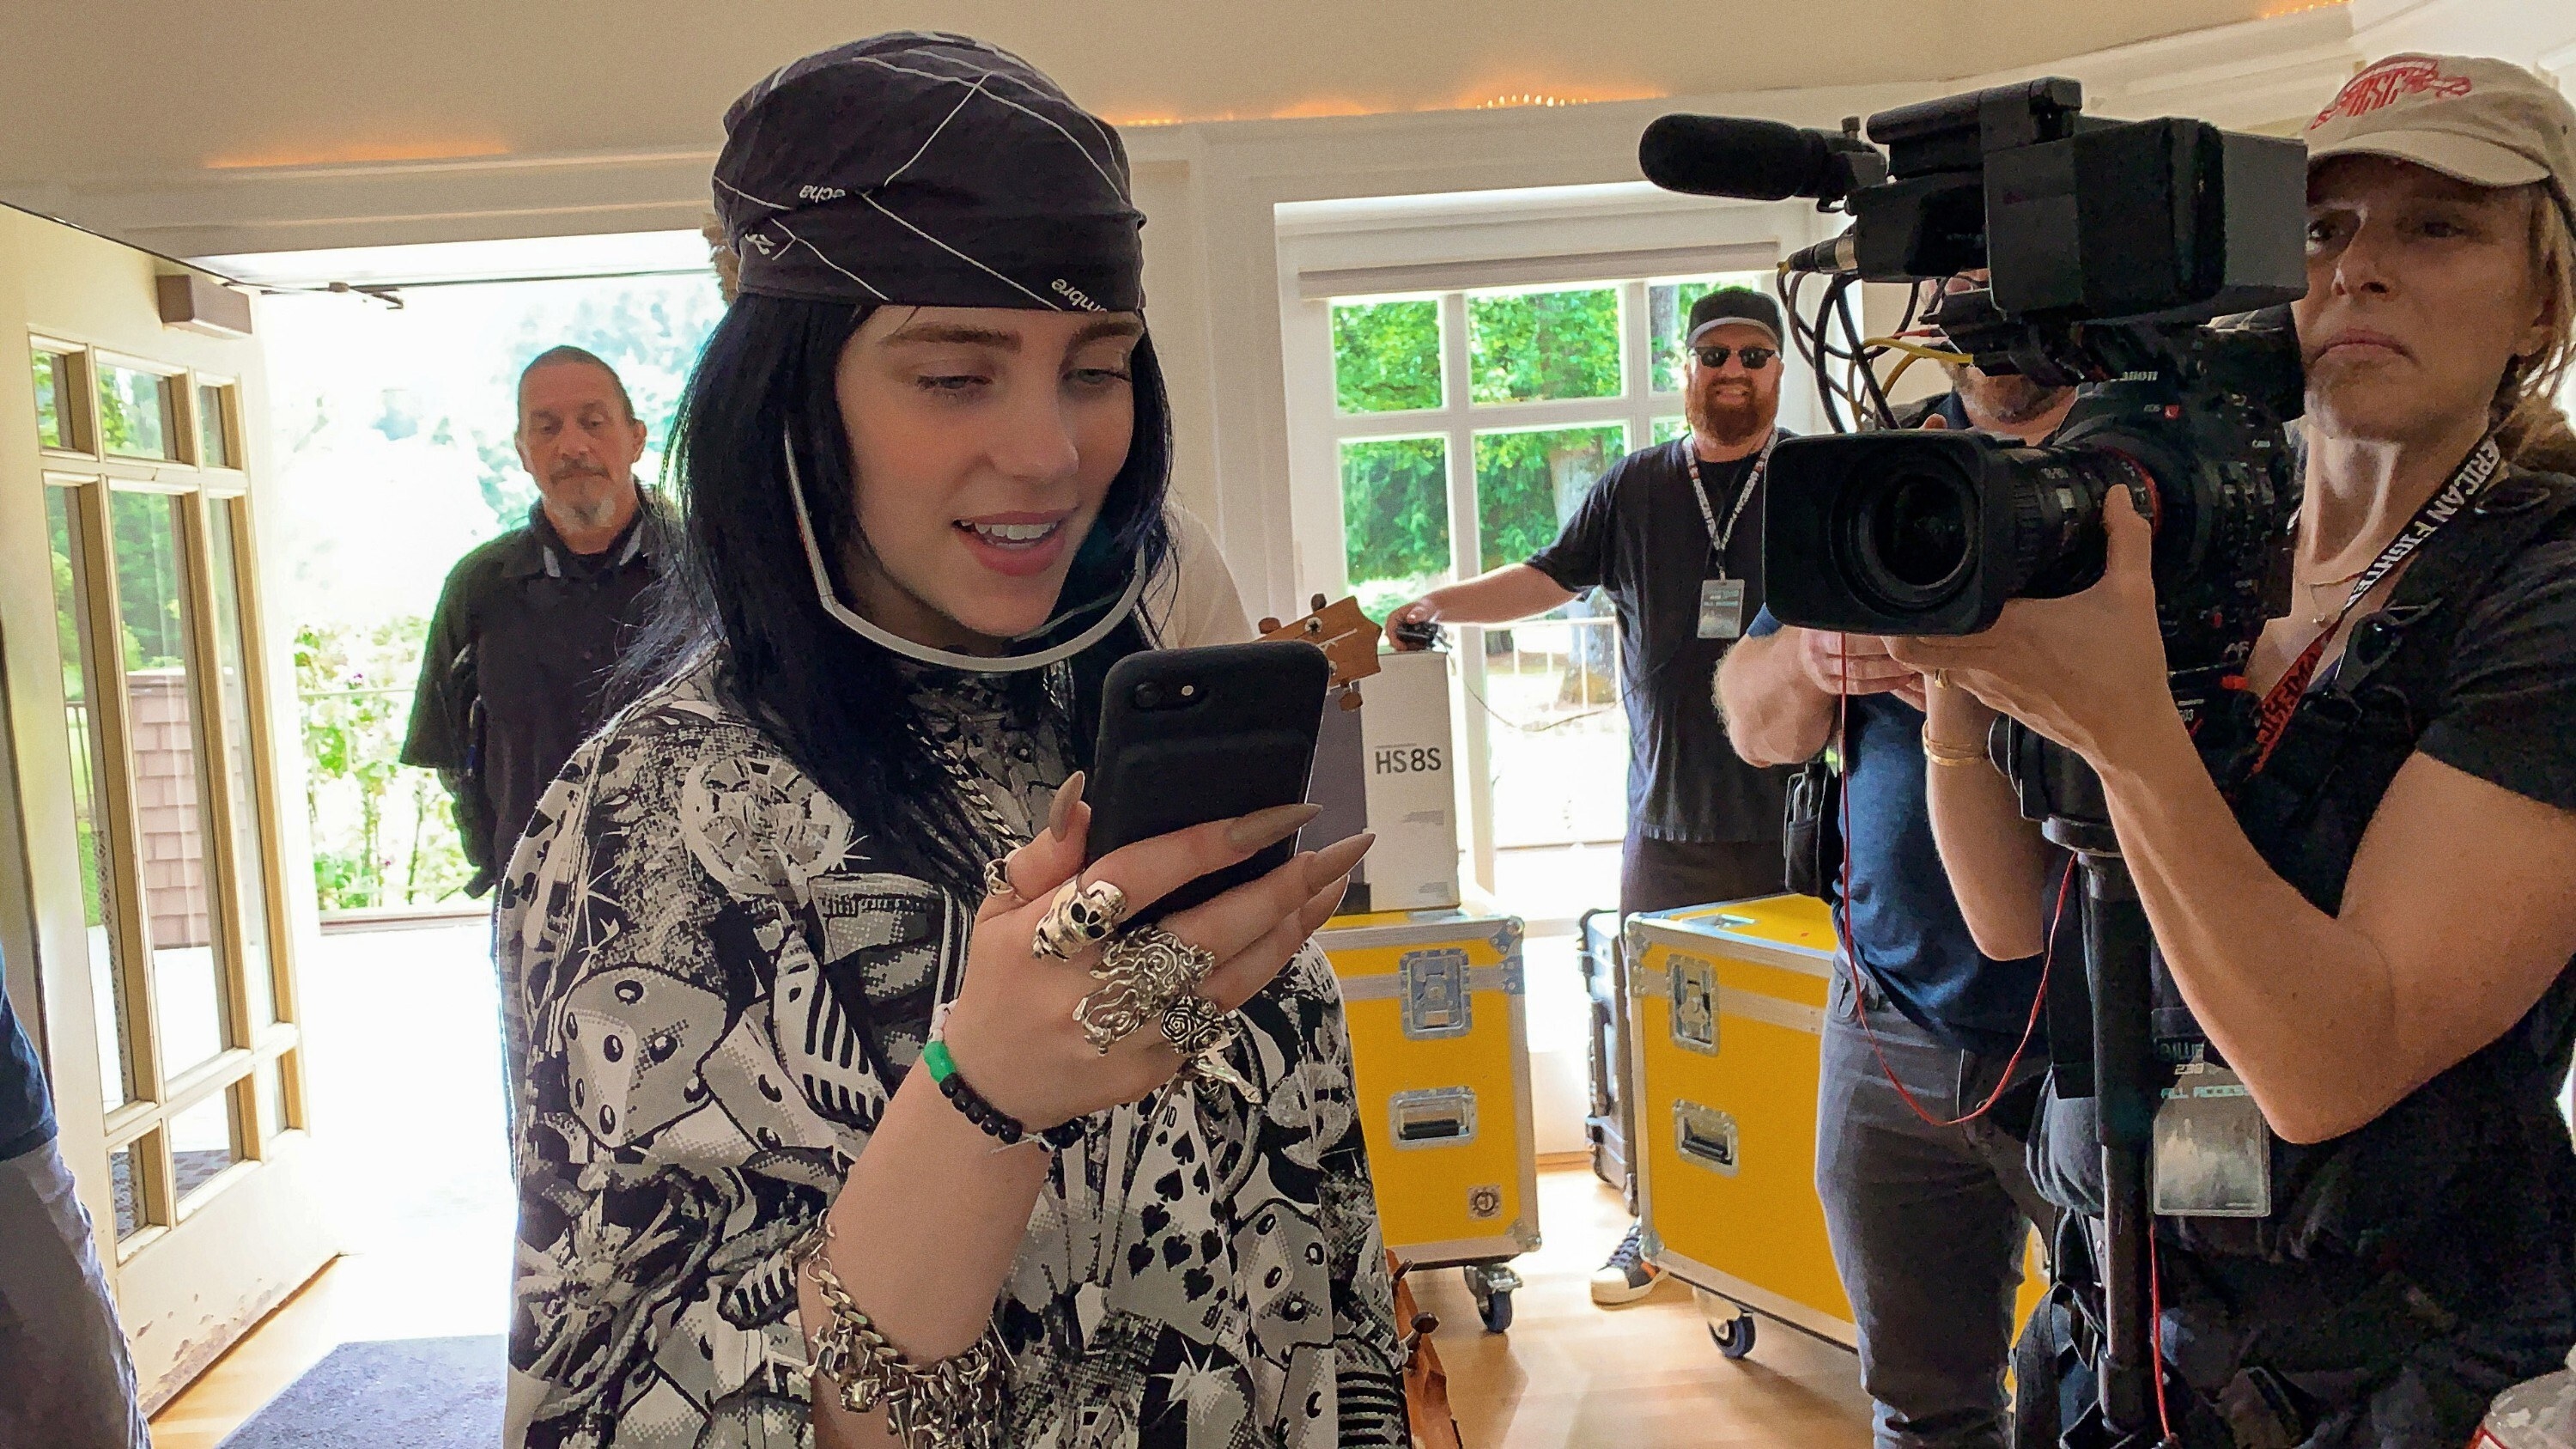 Billie Eilish, a white teenage girl, stands in a room looking at her phone. She wears a bandana in her hair and has many silver rings. A woman holding a movie camera shoots her